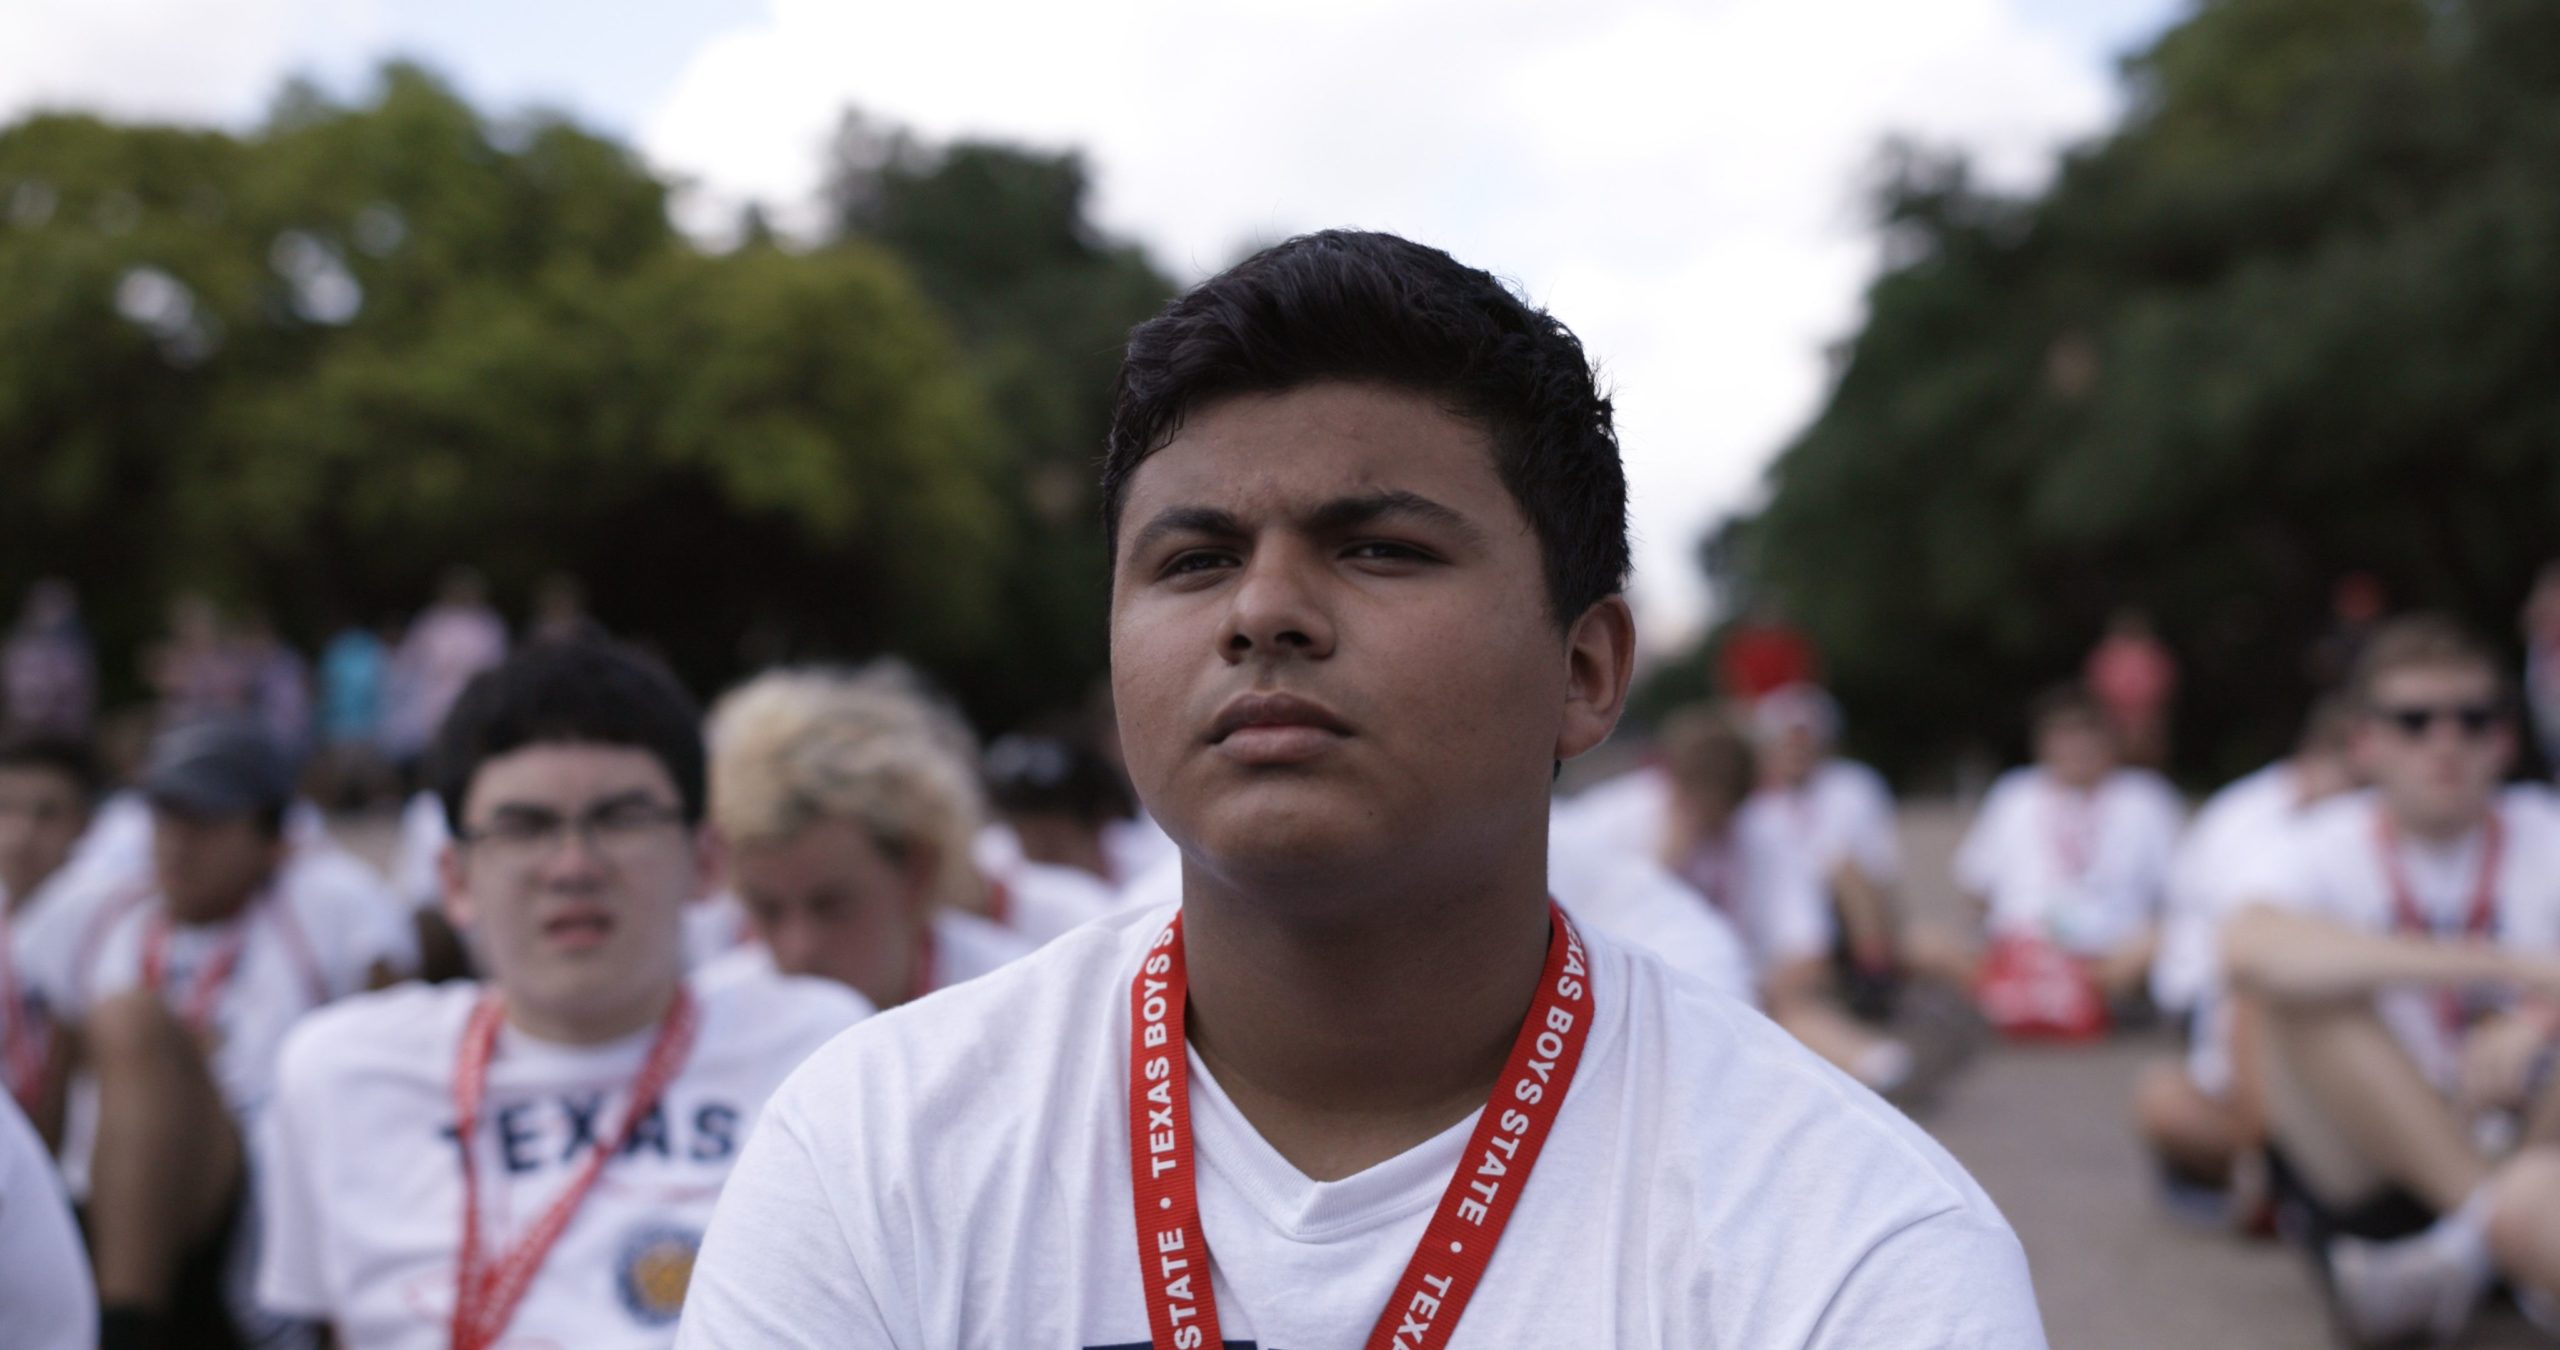 Steven Garza from Boys State standing in a crowd